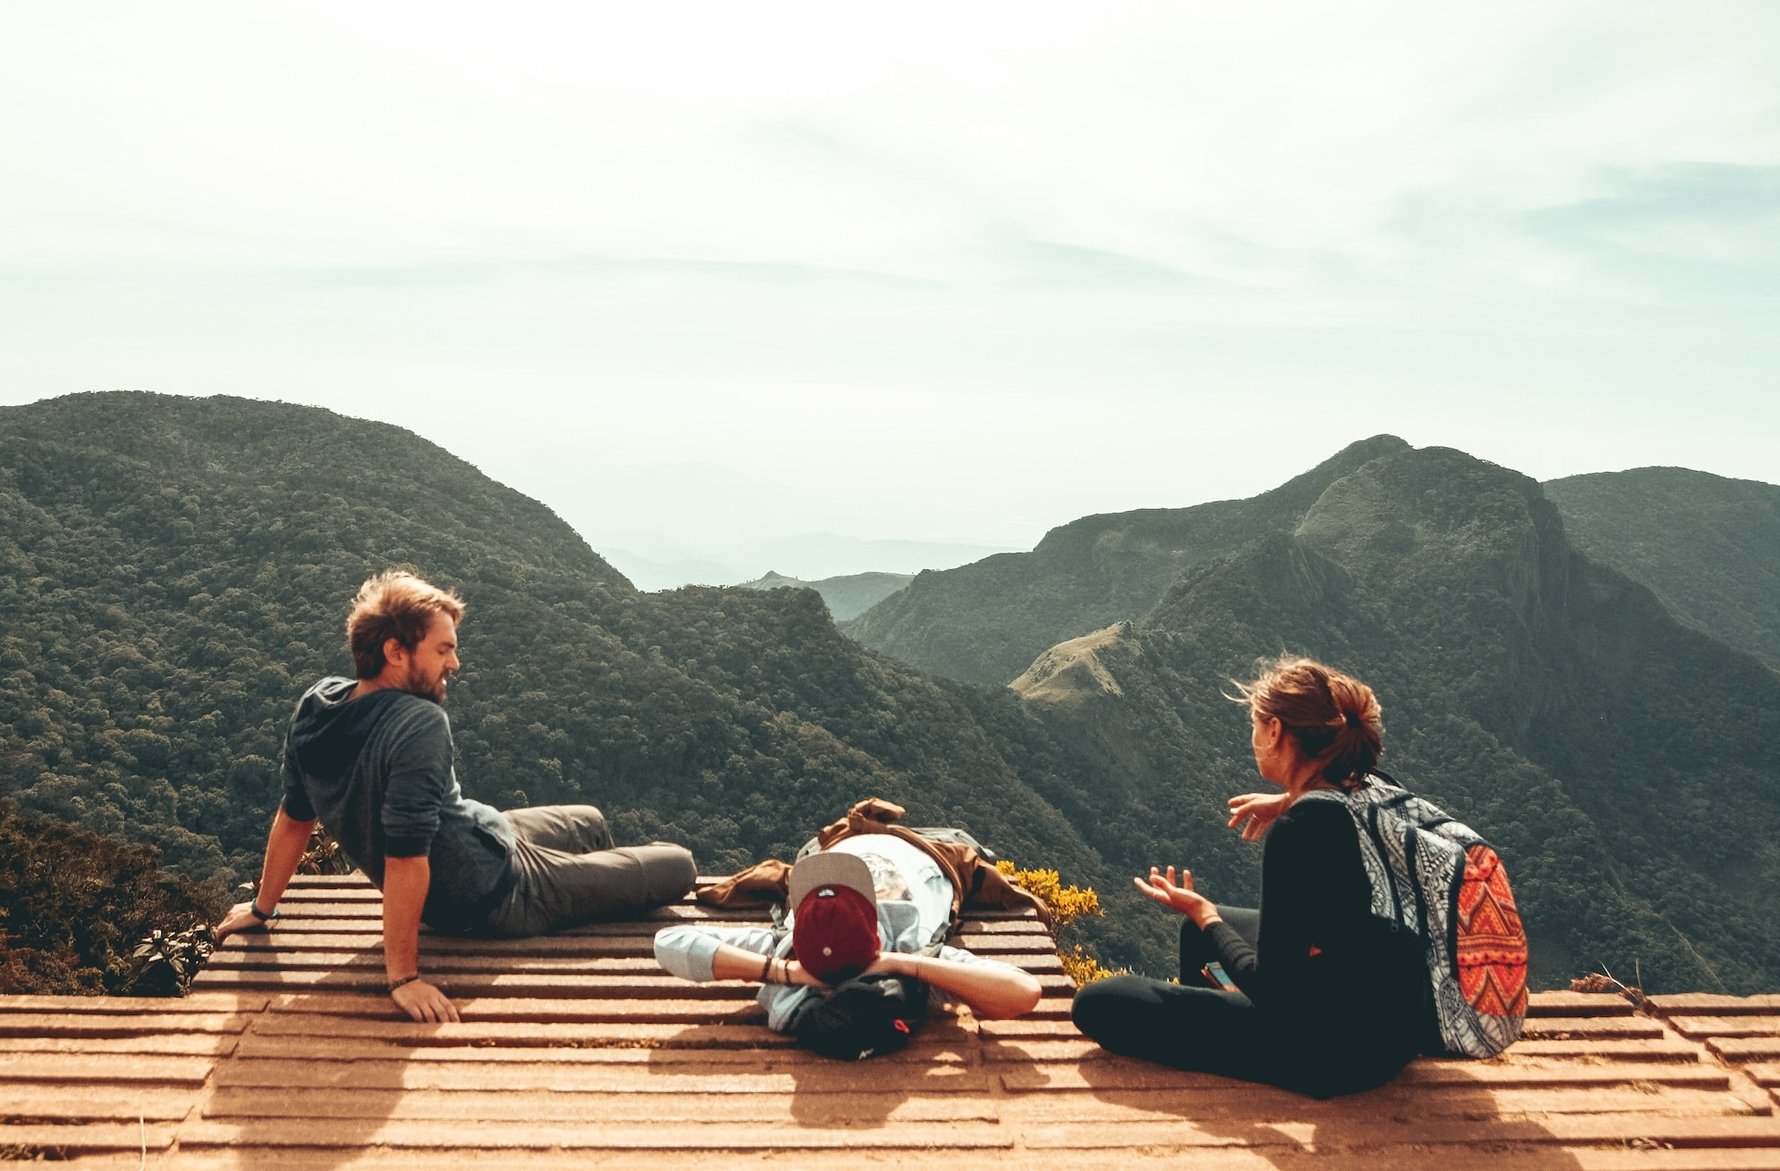 5 Activities to Try Out When On Vacation - Family Hiking © Eddy Billard / Unsplash